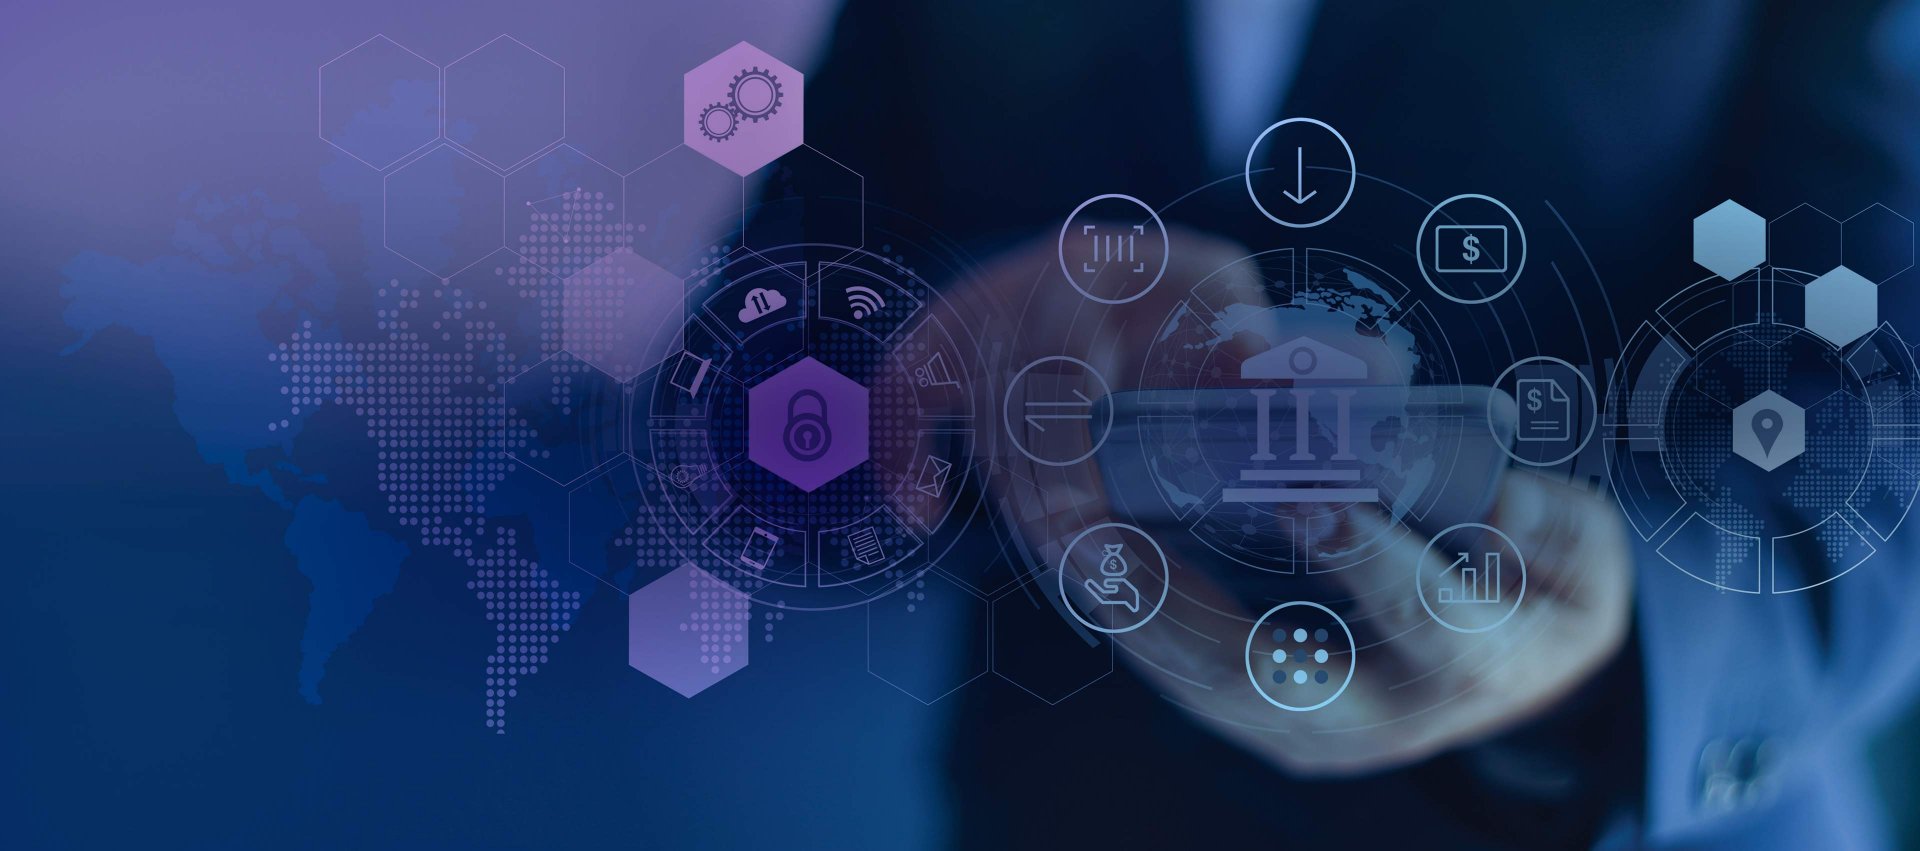 Enabling the Future of Banking with Multi-Service Port and Secure Cloud Connect